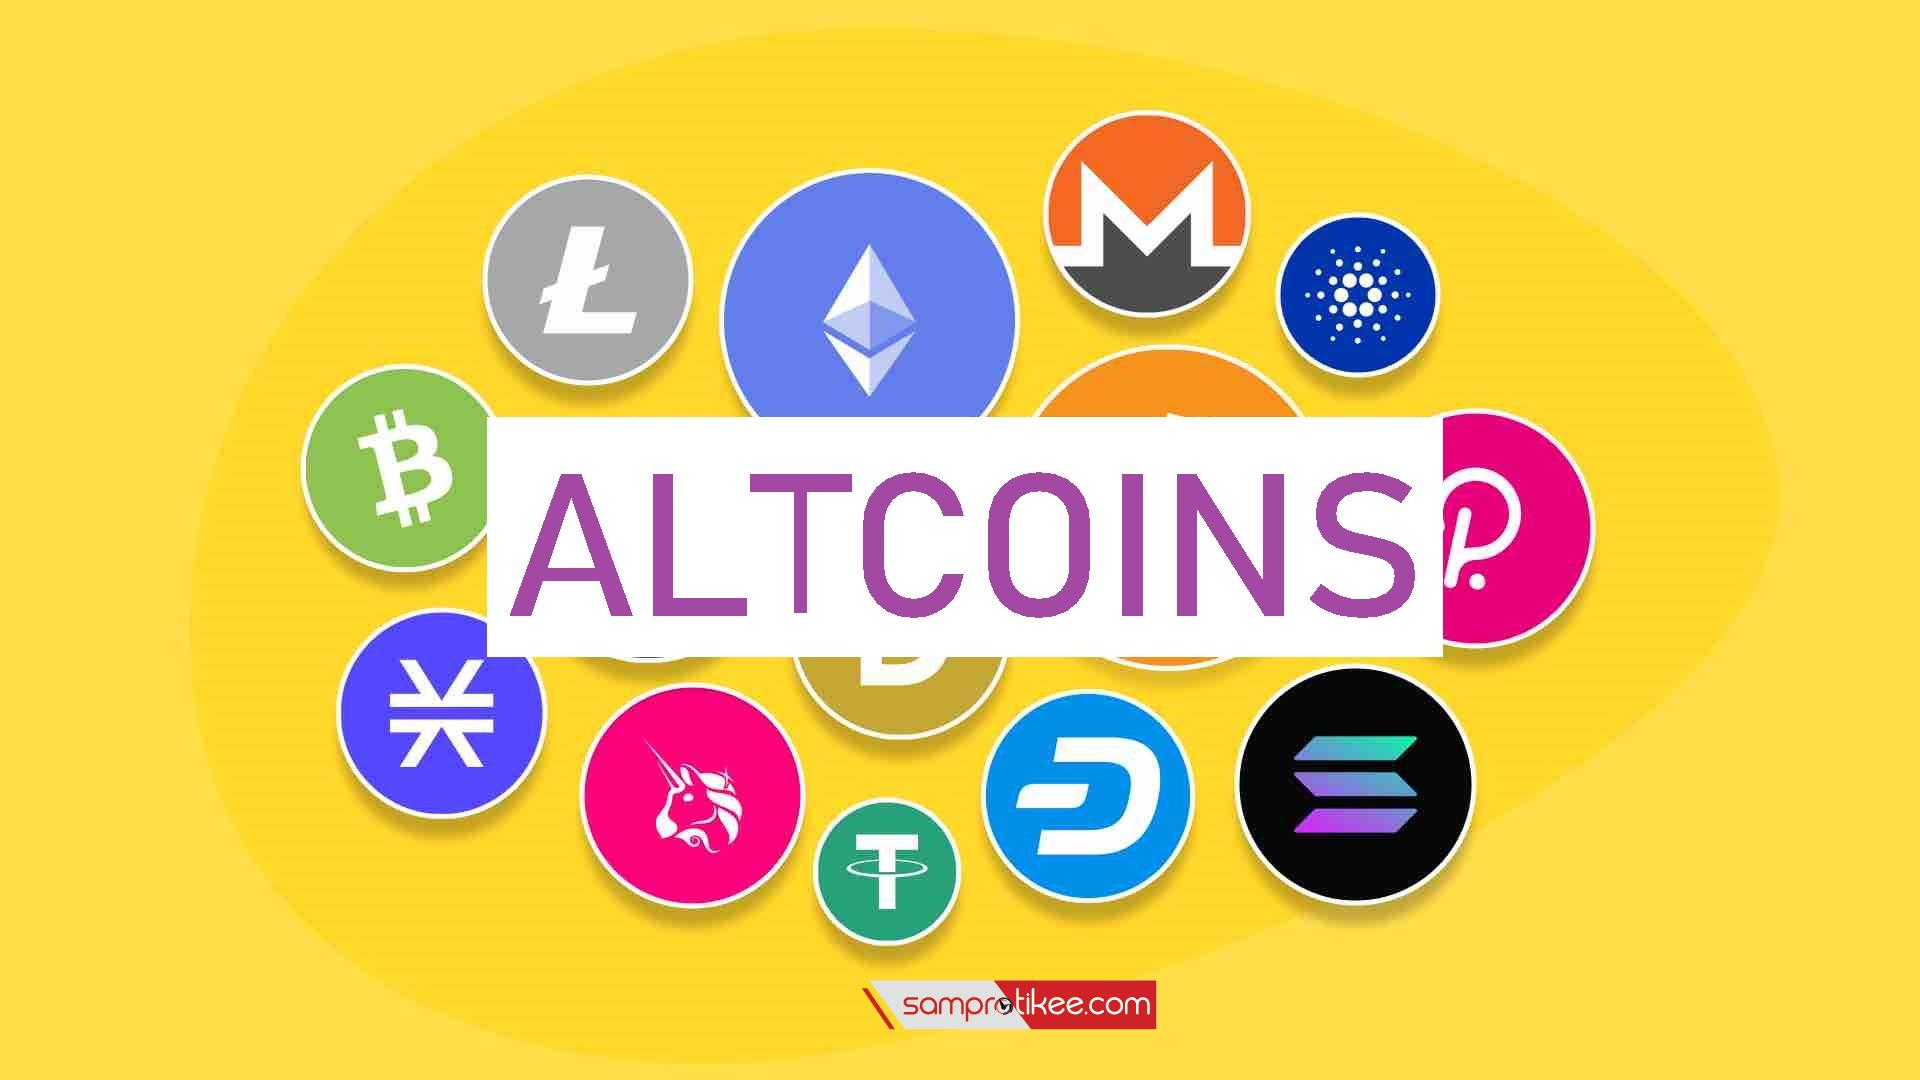 Best altcoins for 2022 - Samprotikee